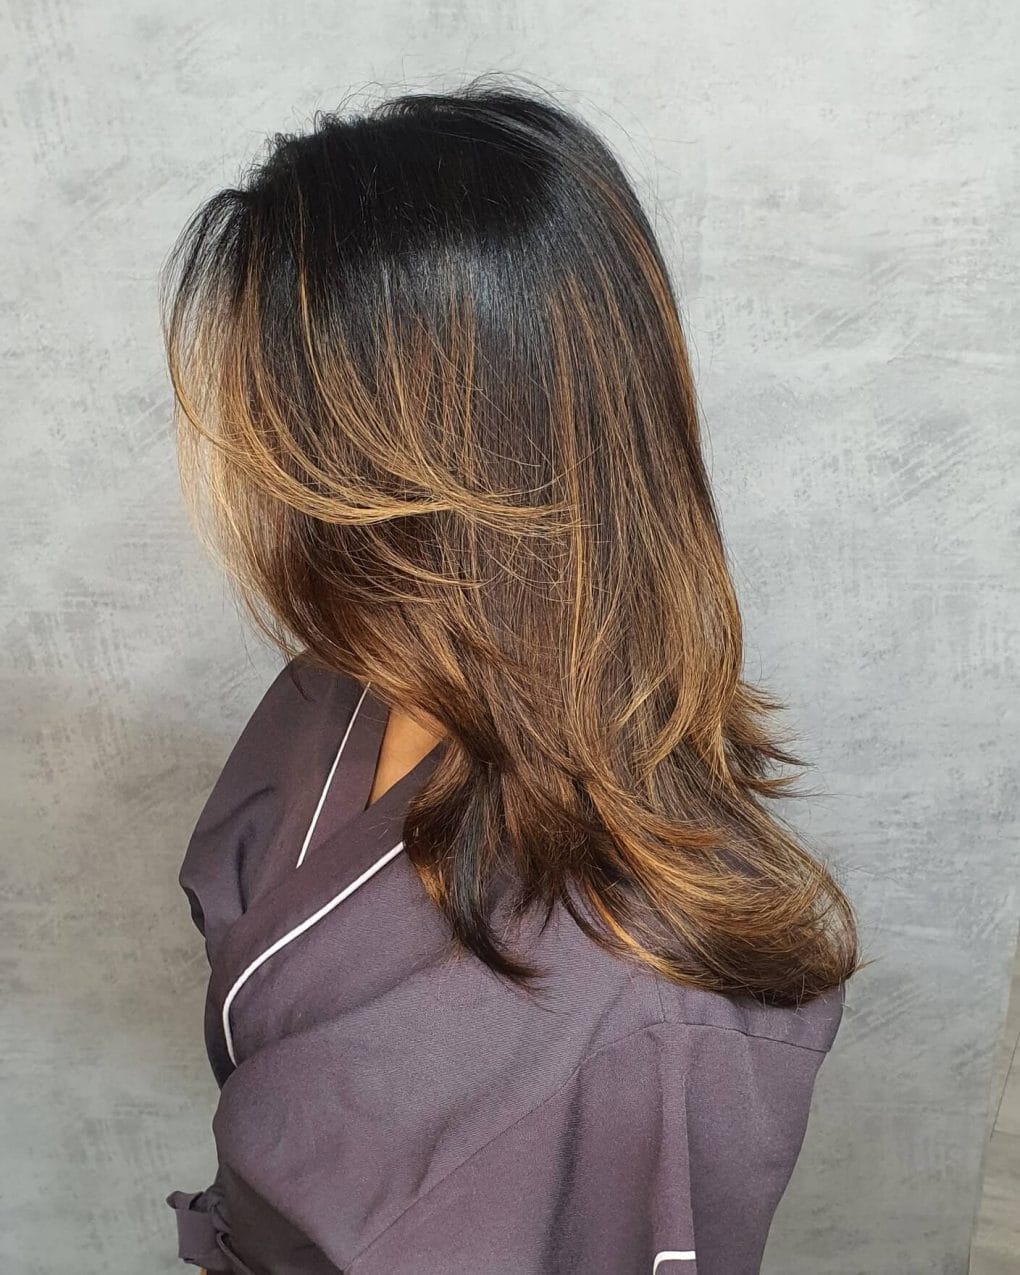 OmbrÃ© Butterfly Cut transitioning from dark roots to golden blond tips.